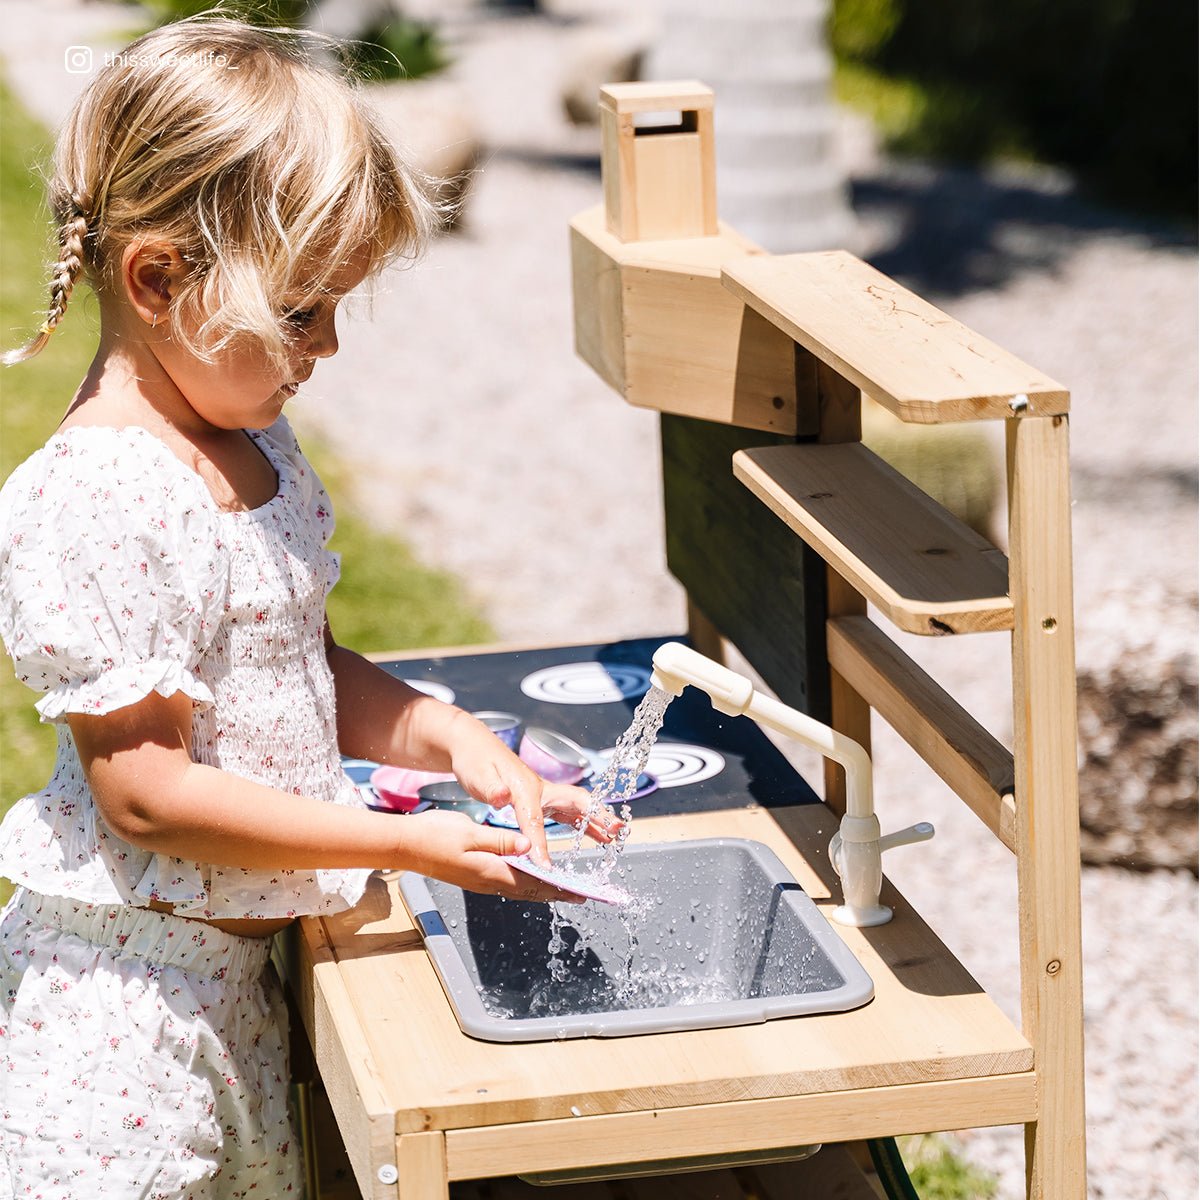 Discover Ramsey Outdoor Play Kitchen: Inspiring Kids to Play and Cook